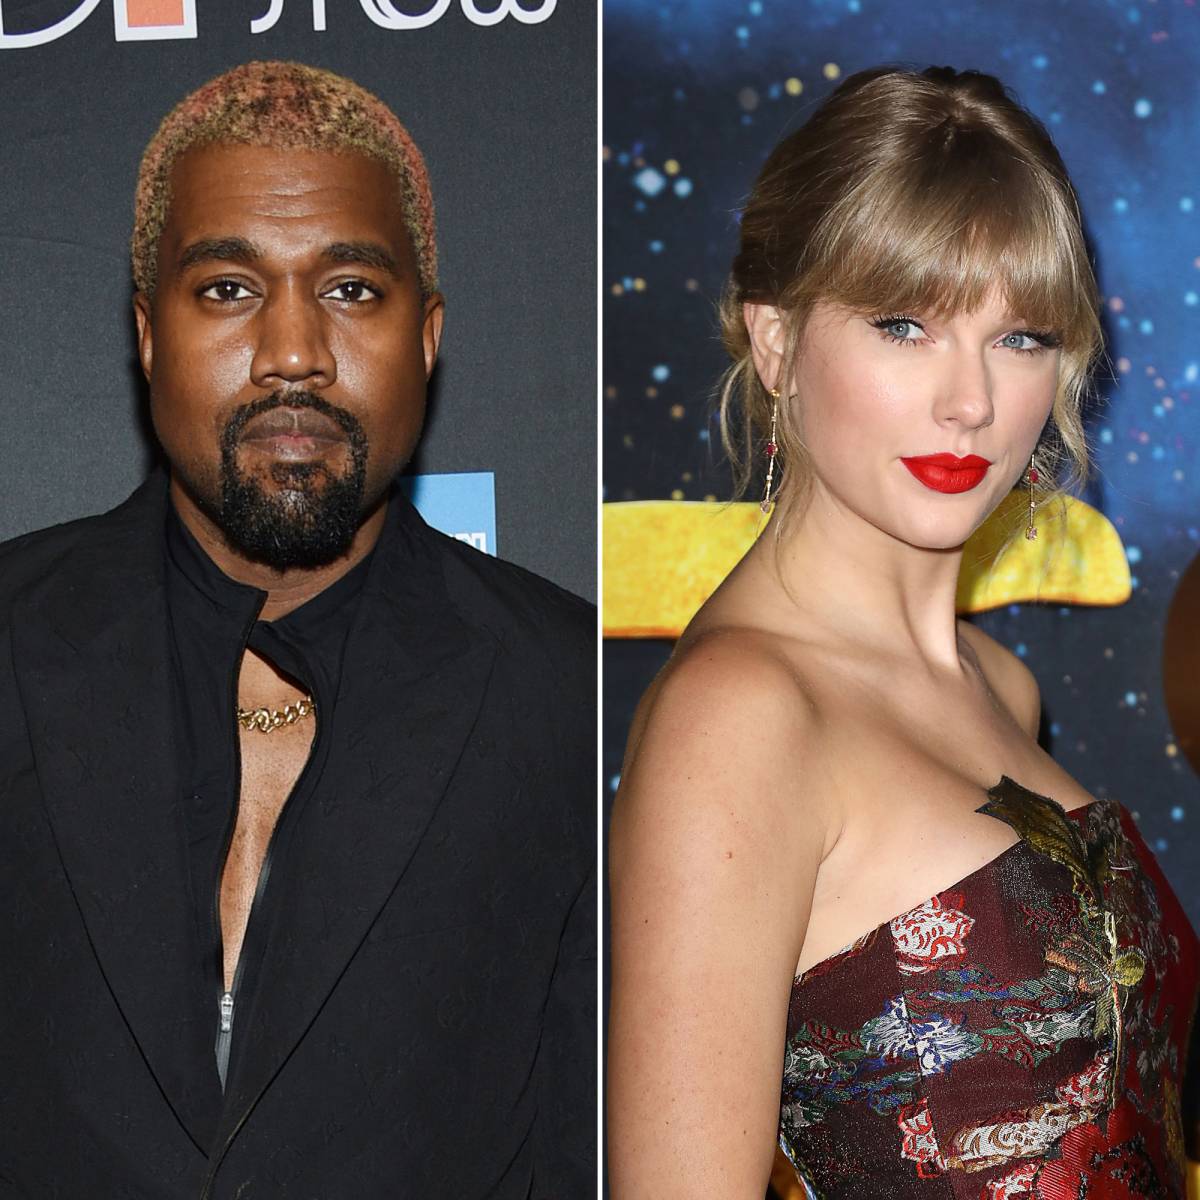 Taylor Swift Porn Tube - Kanye West Vows to Get Taylor Swift Her Music Back Amid Twitter Rant